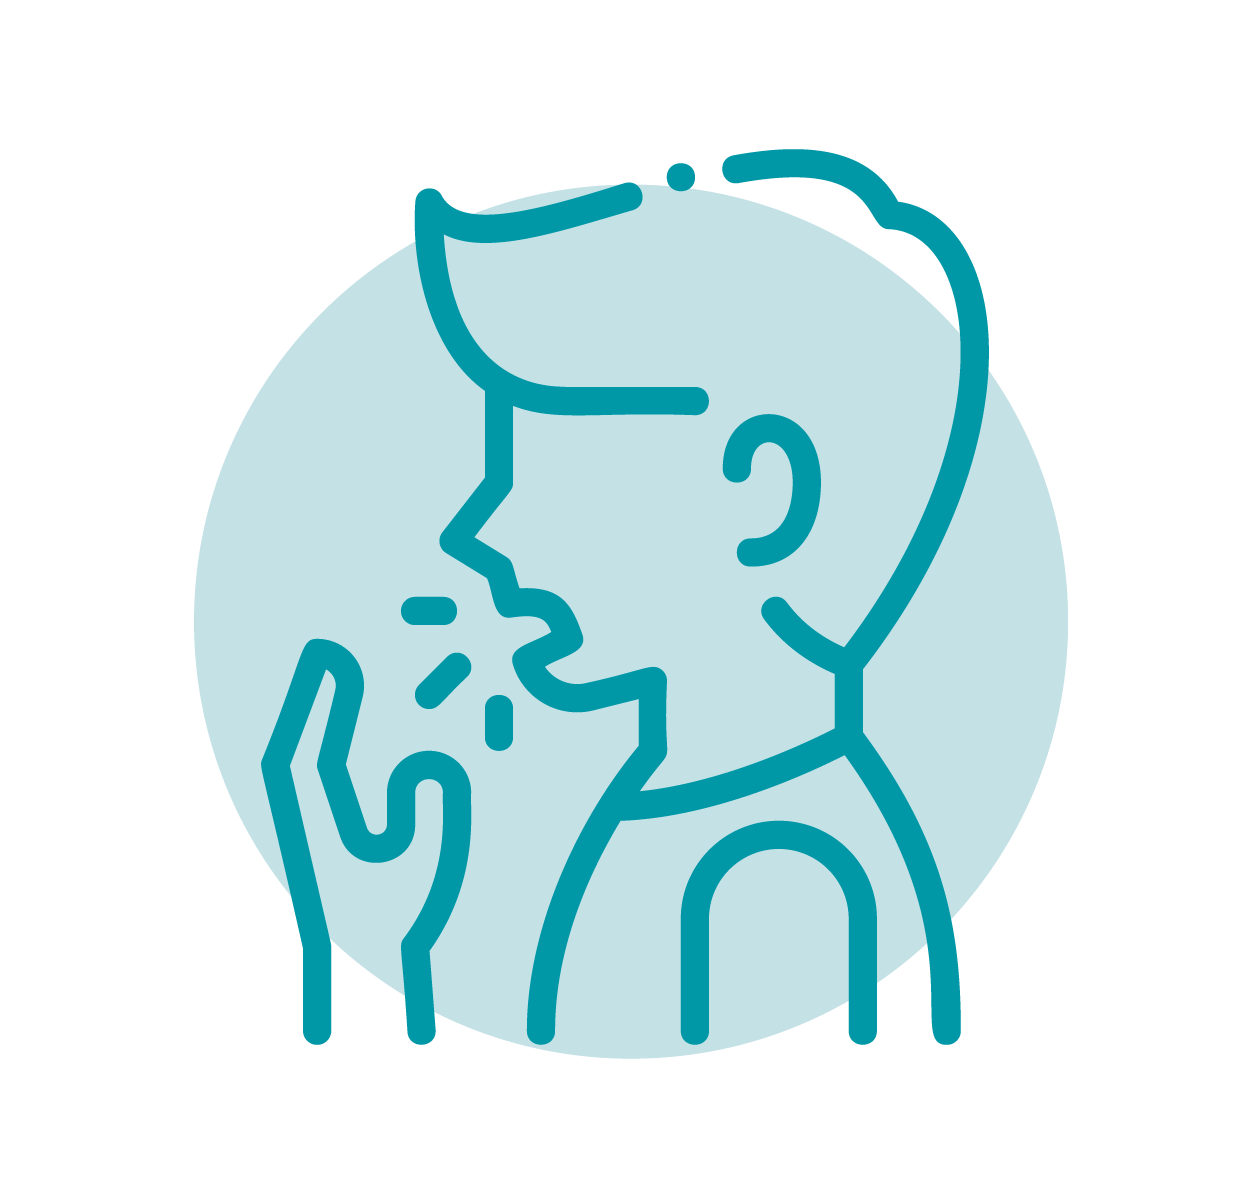 Graphic icon of person coughing into hand.